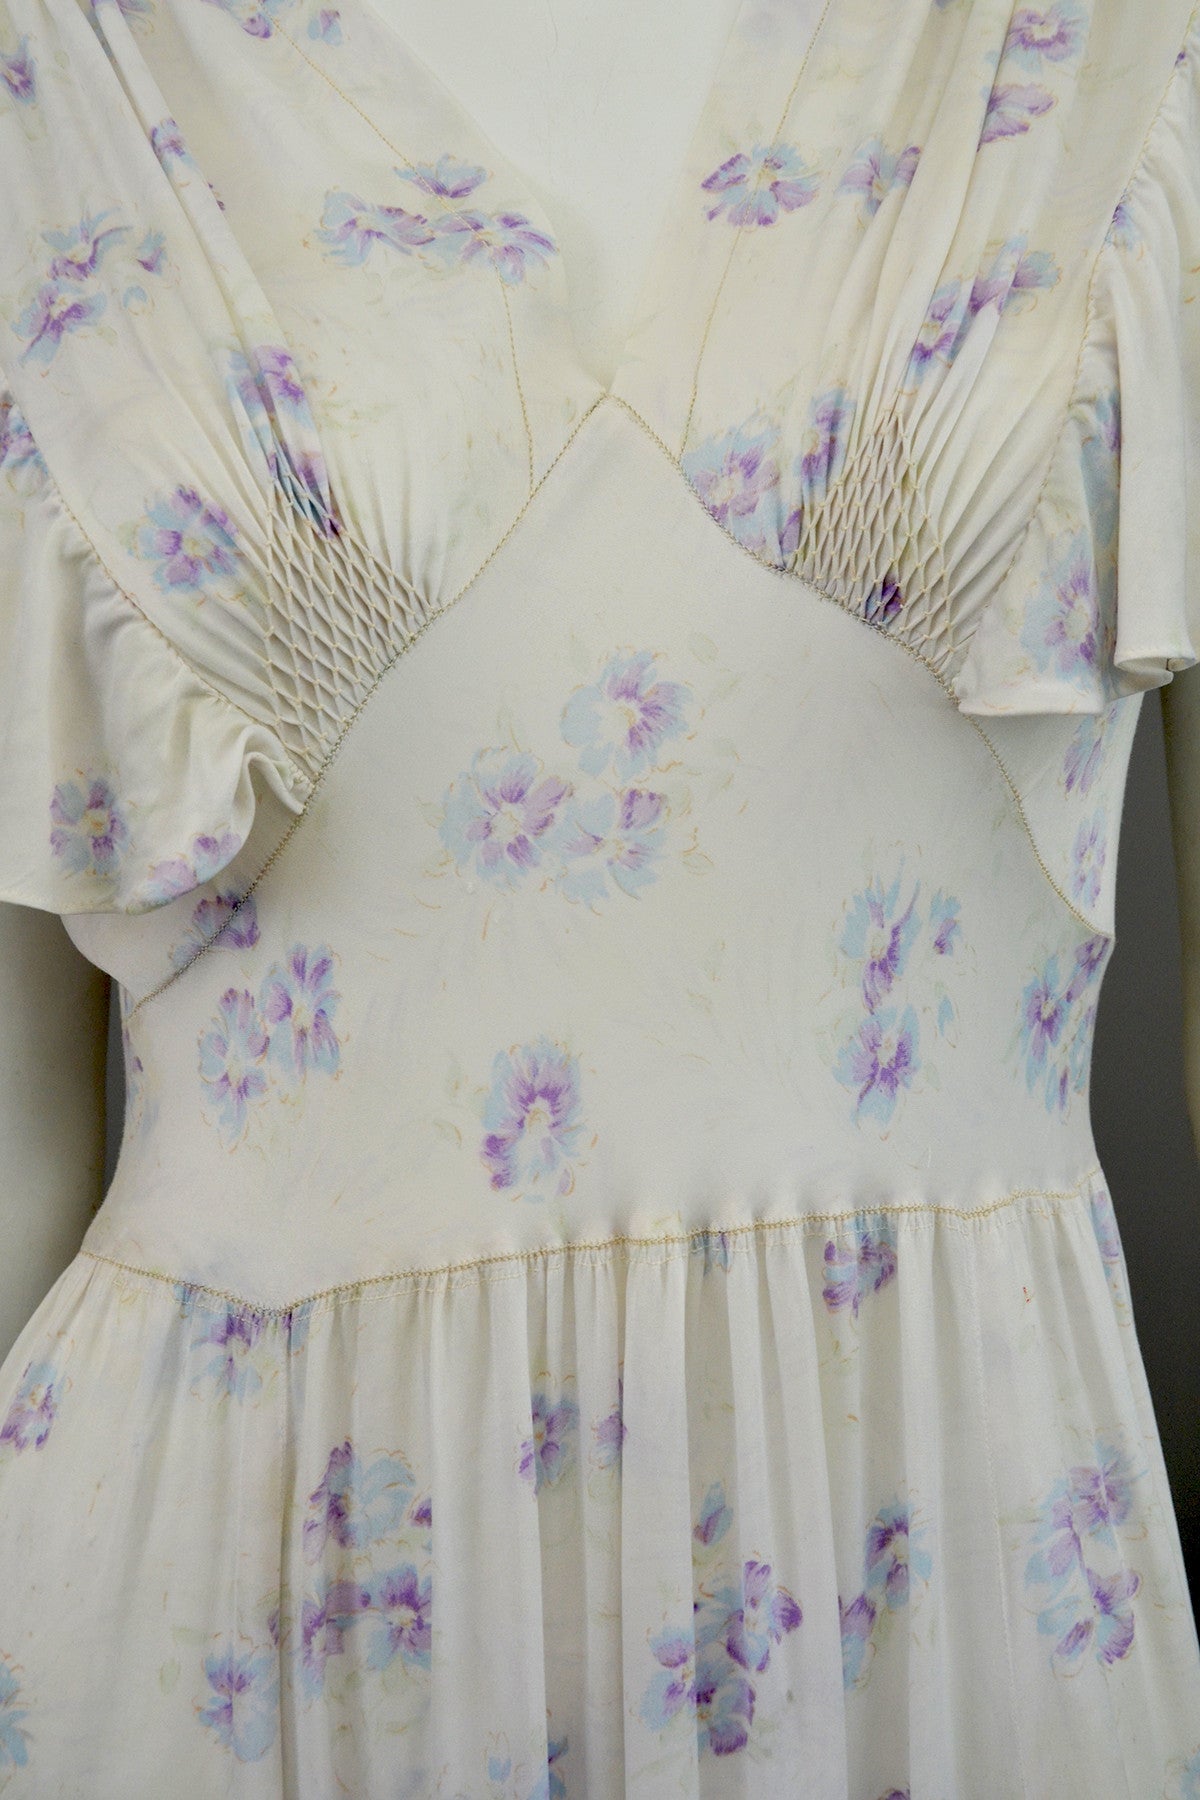 1930s Eggshell Silky Lilac Floral Print Smocked Flutter Sleeves Negligee Slip Dress